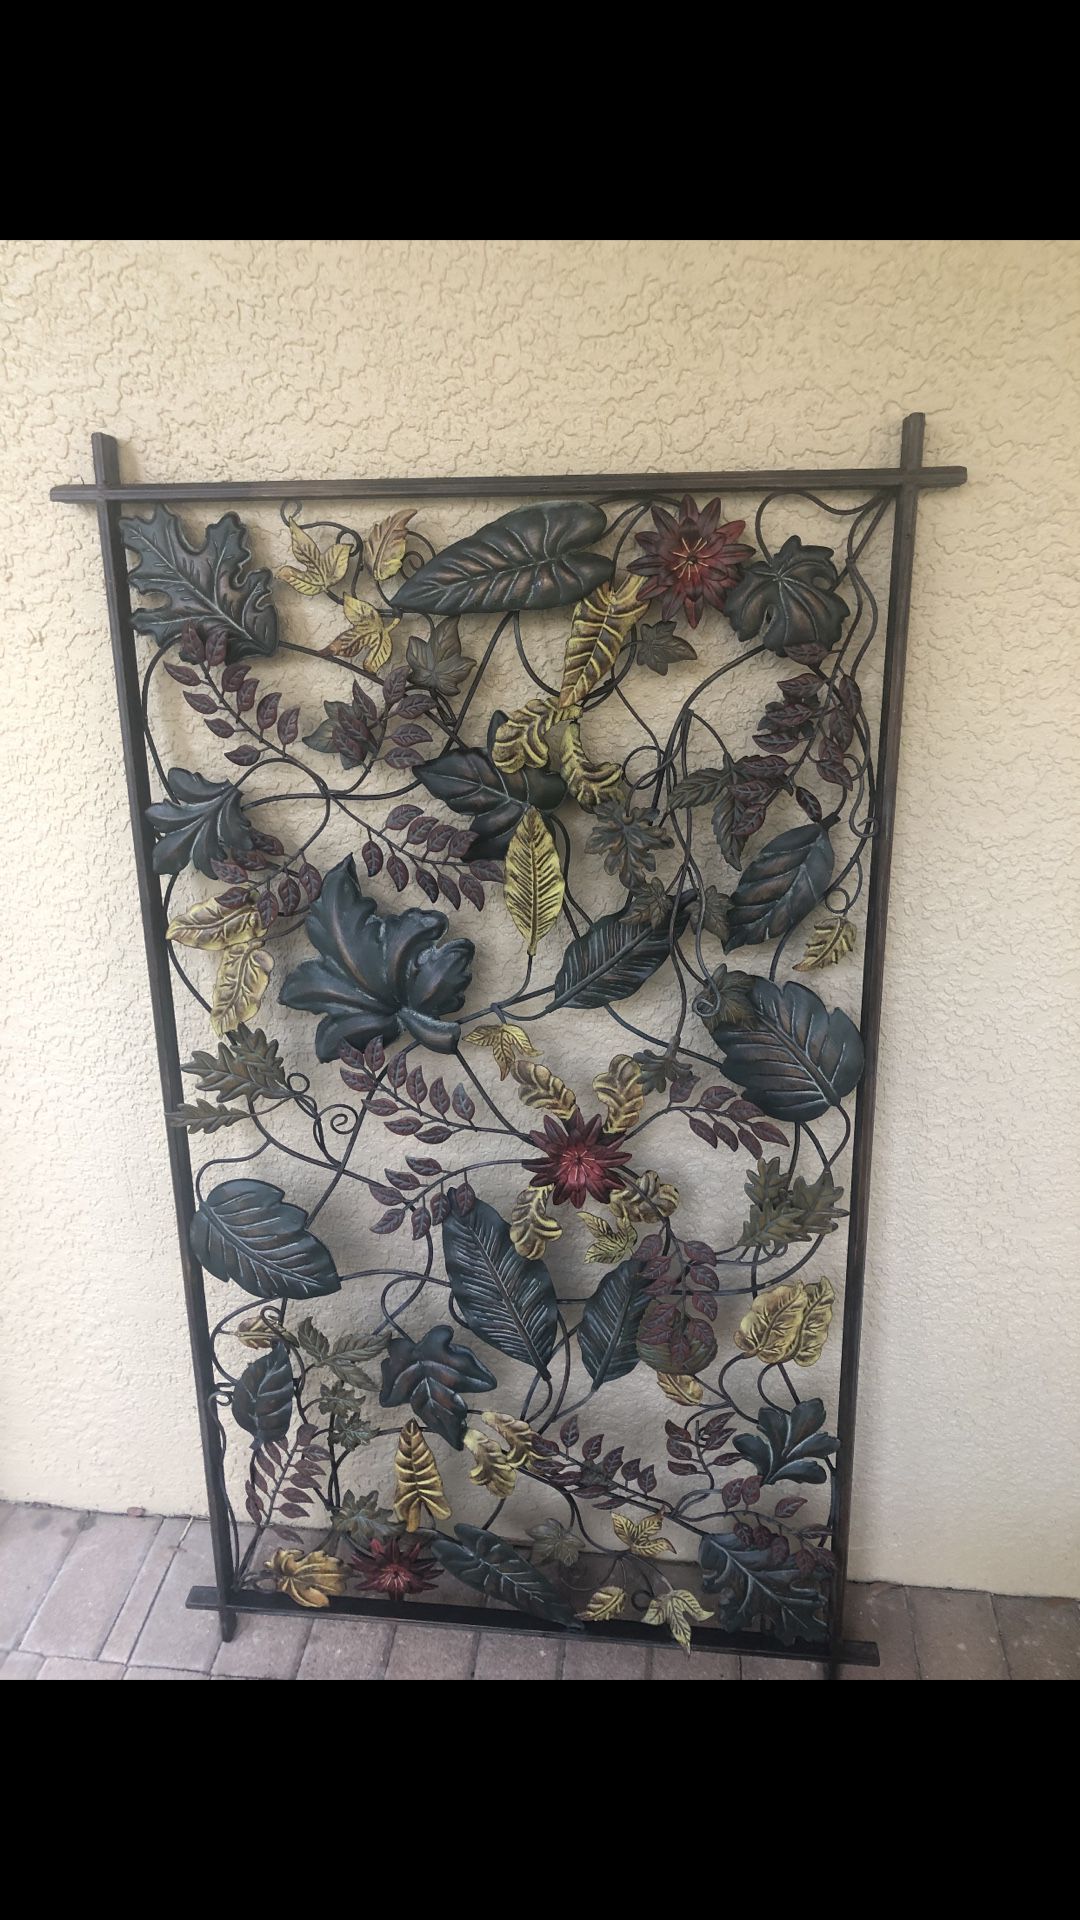 Large metal wall hanging. 51x31 inches